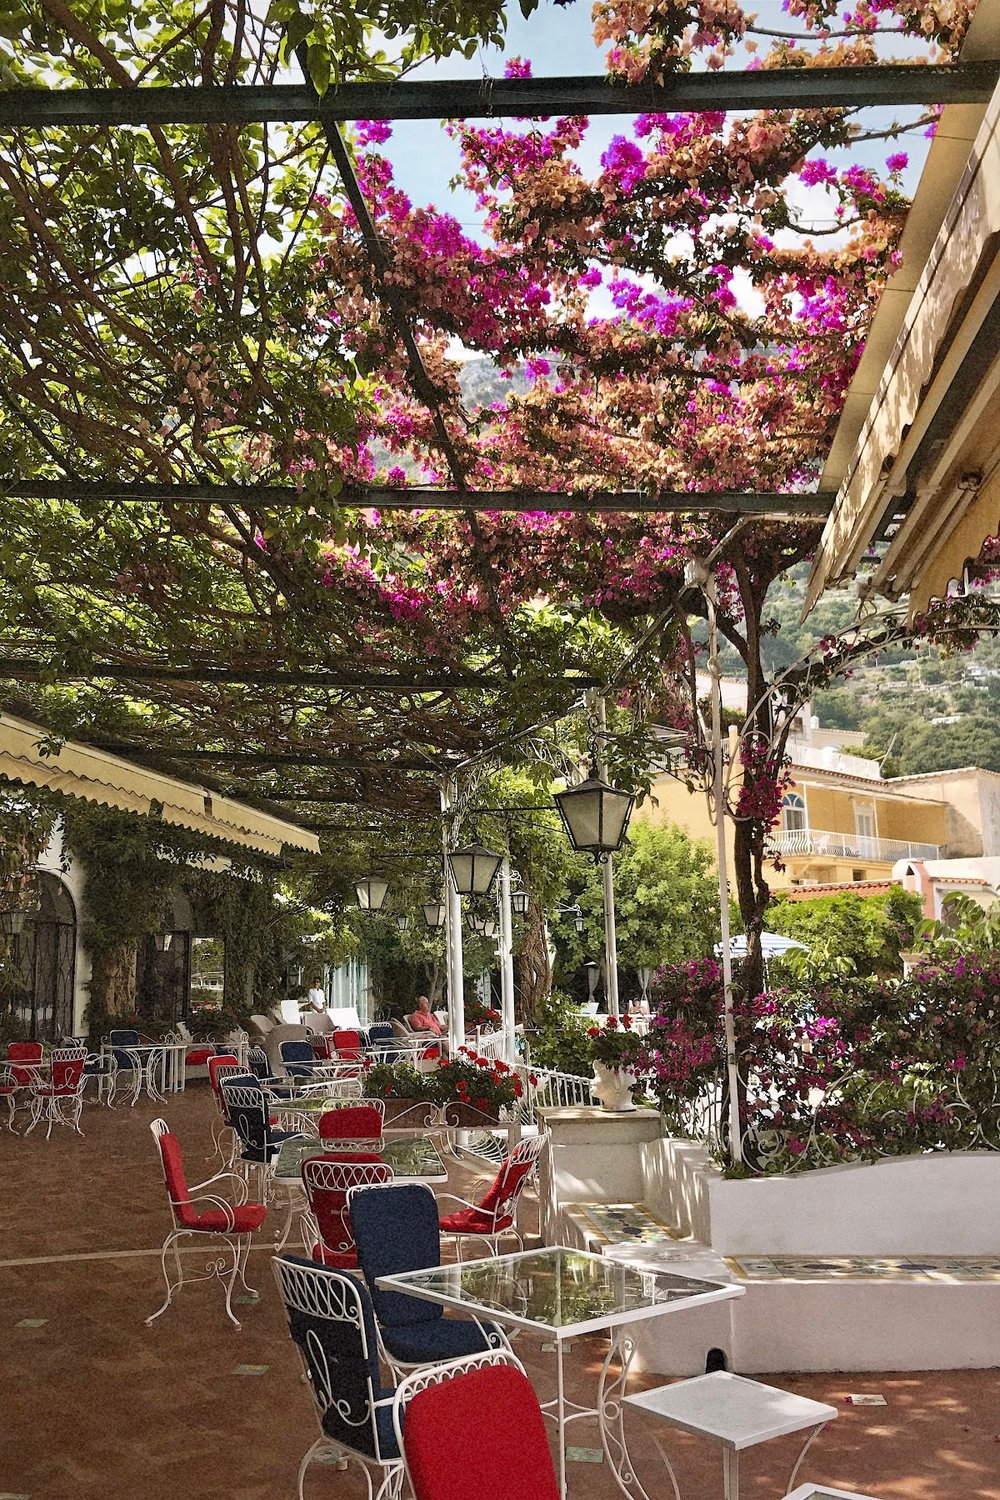 Il Tridente Restaurant and Cocktail Bar is located at Hotel Poseidon and is one of the best restaurants in Positano